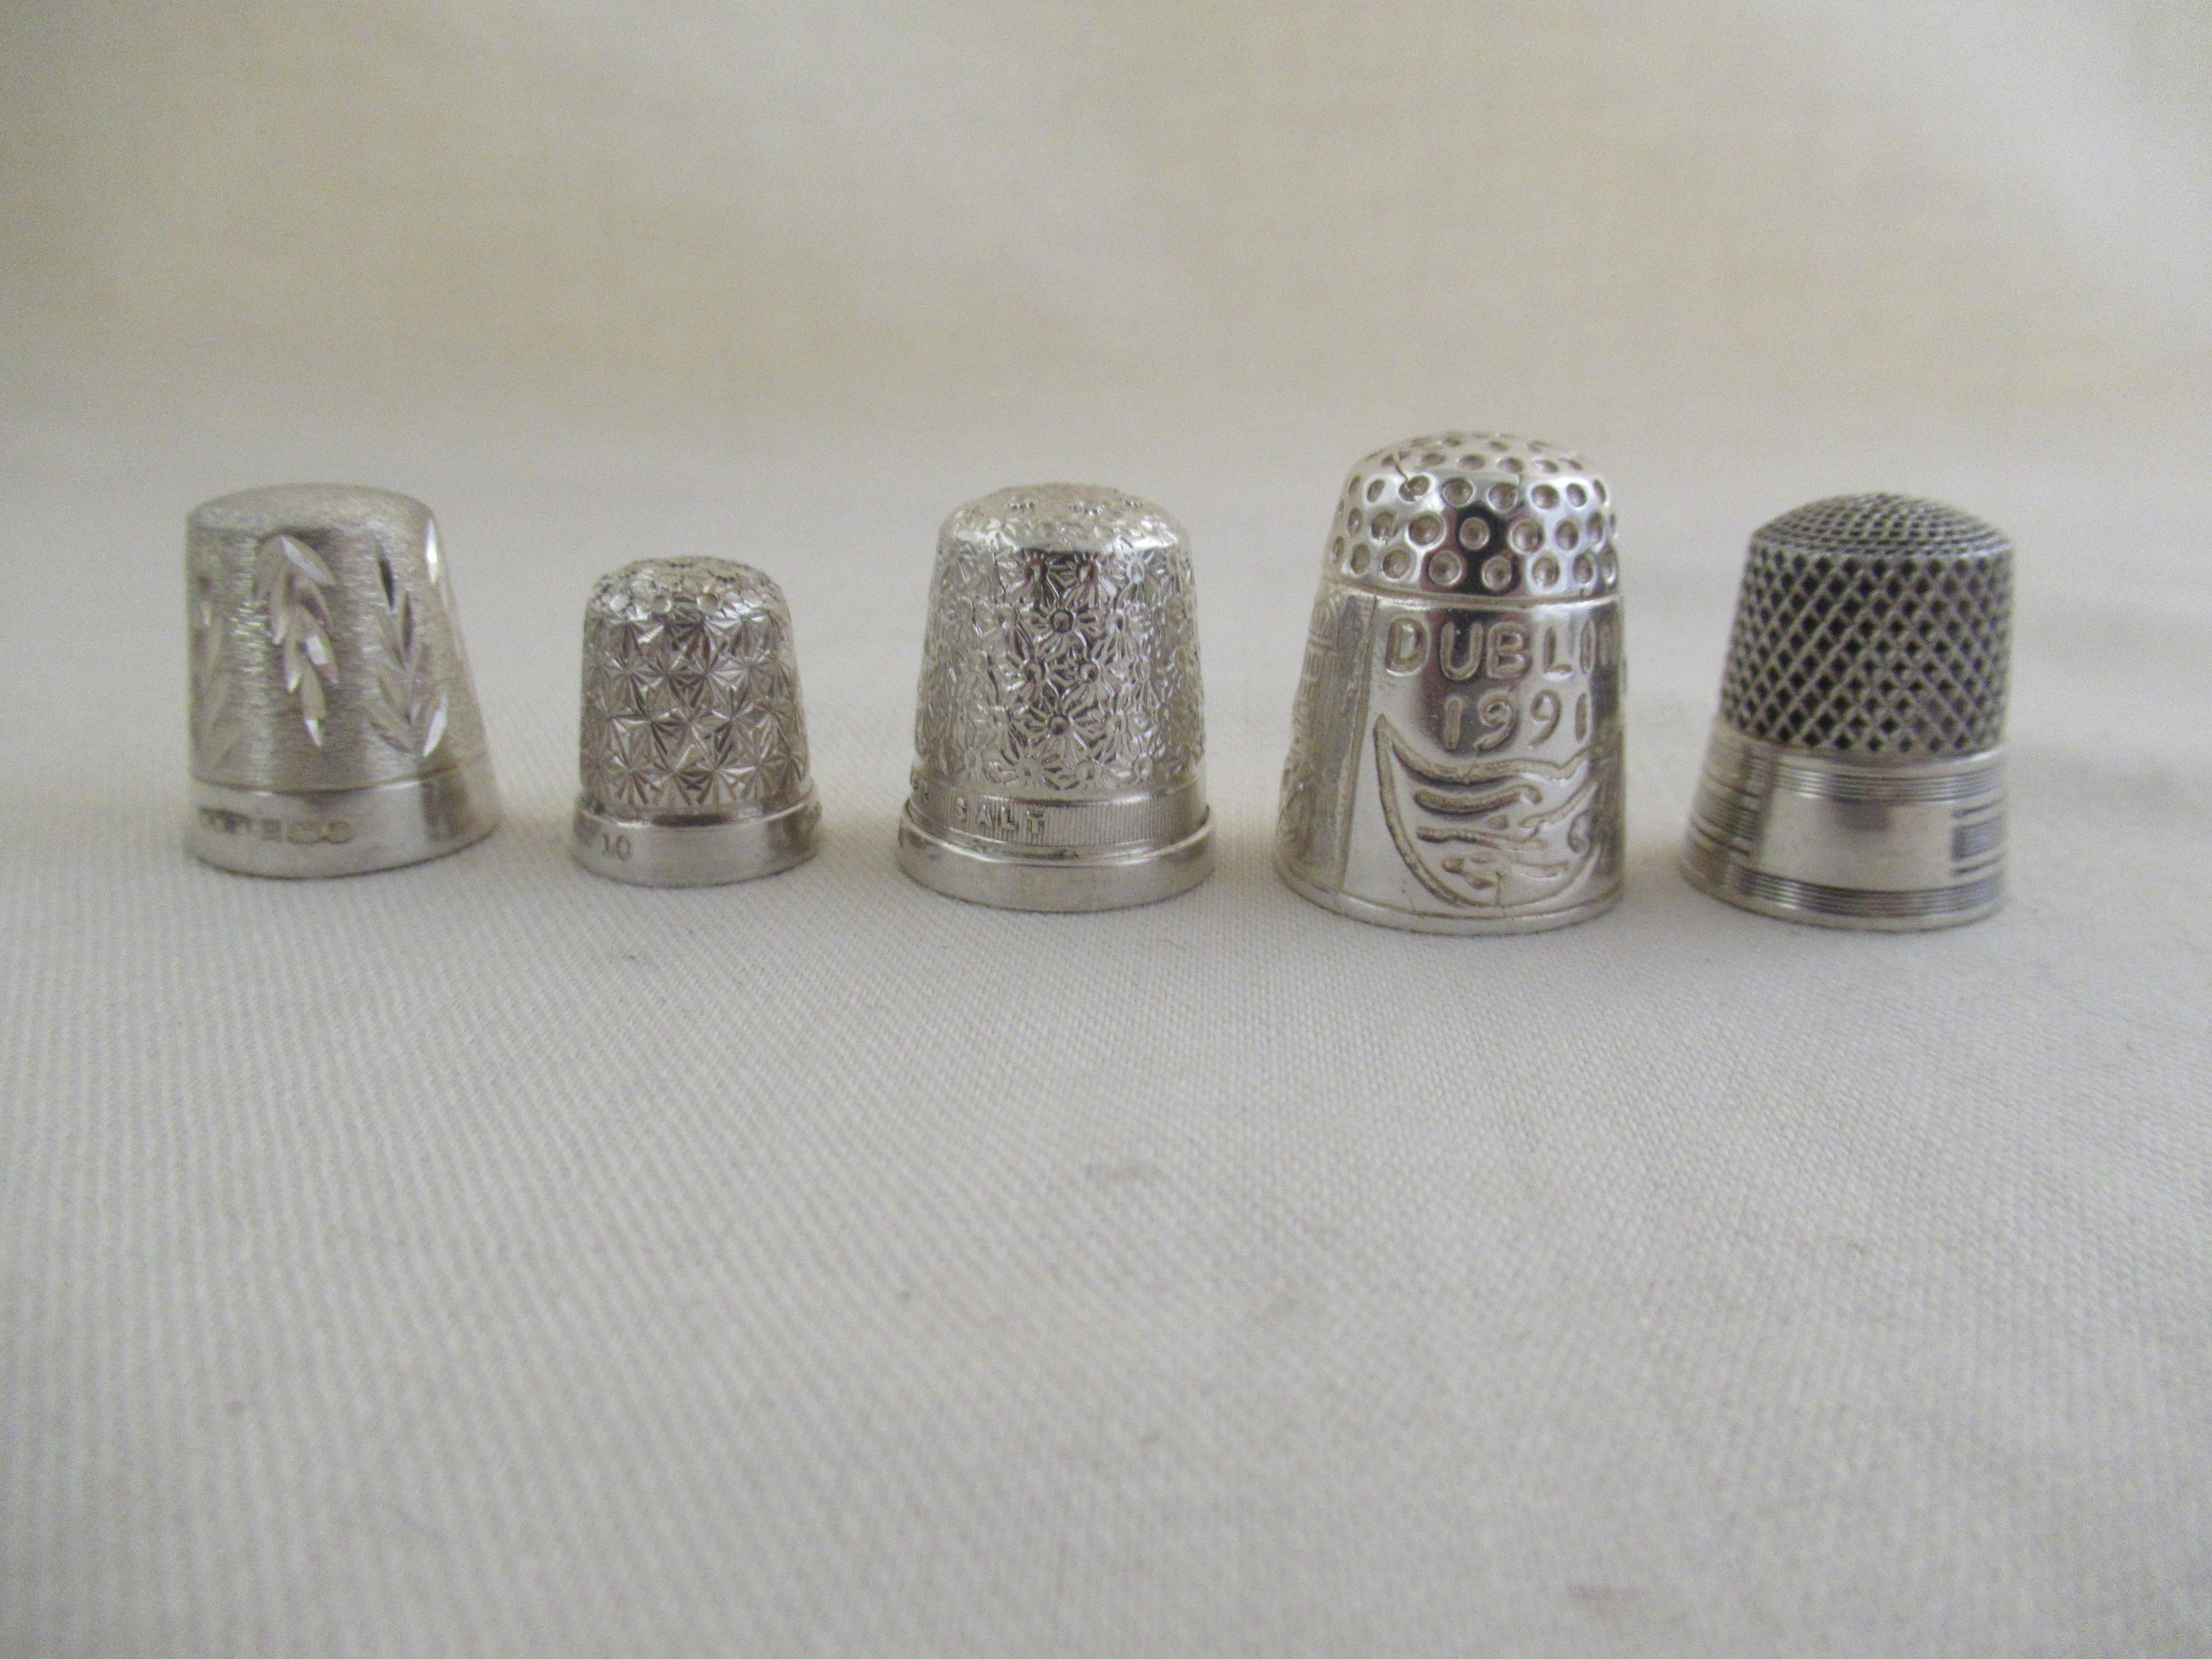 10 excellent thimbles, all are English except Nos. 2 & 10, made in the USA.
All are from a very large collection that I bought several years ago.
Most of the later ones - 1978 onwards will have been bought, as new, through the Thimble Collector`s